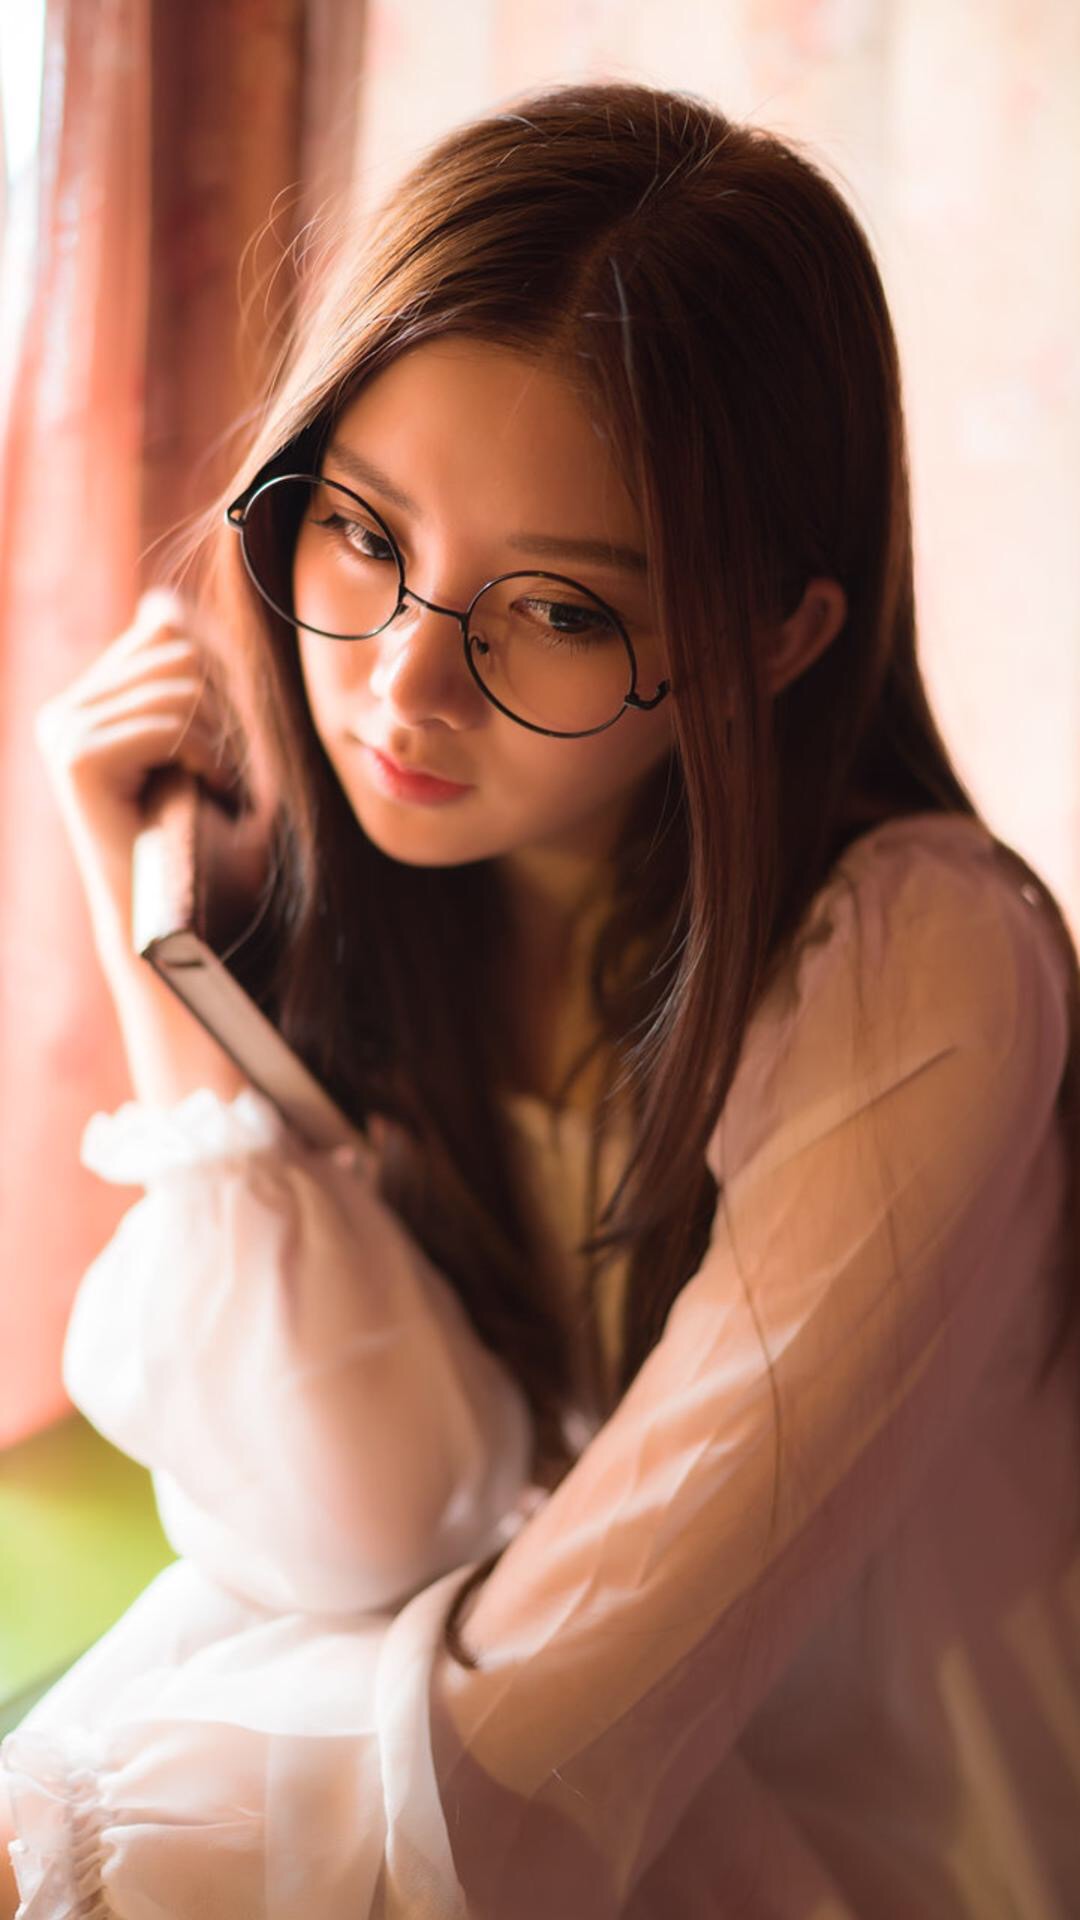 Asian Women Glasses Women With Glasses Brunette Diffused White Shirt Looking Away Long Hair Portrait 1080x1920